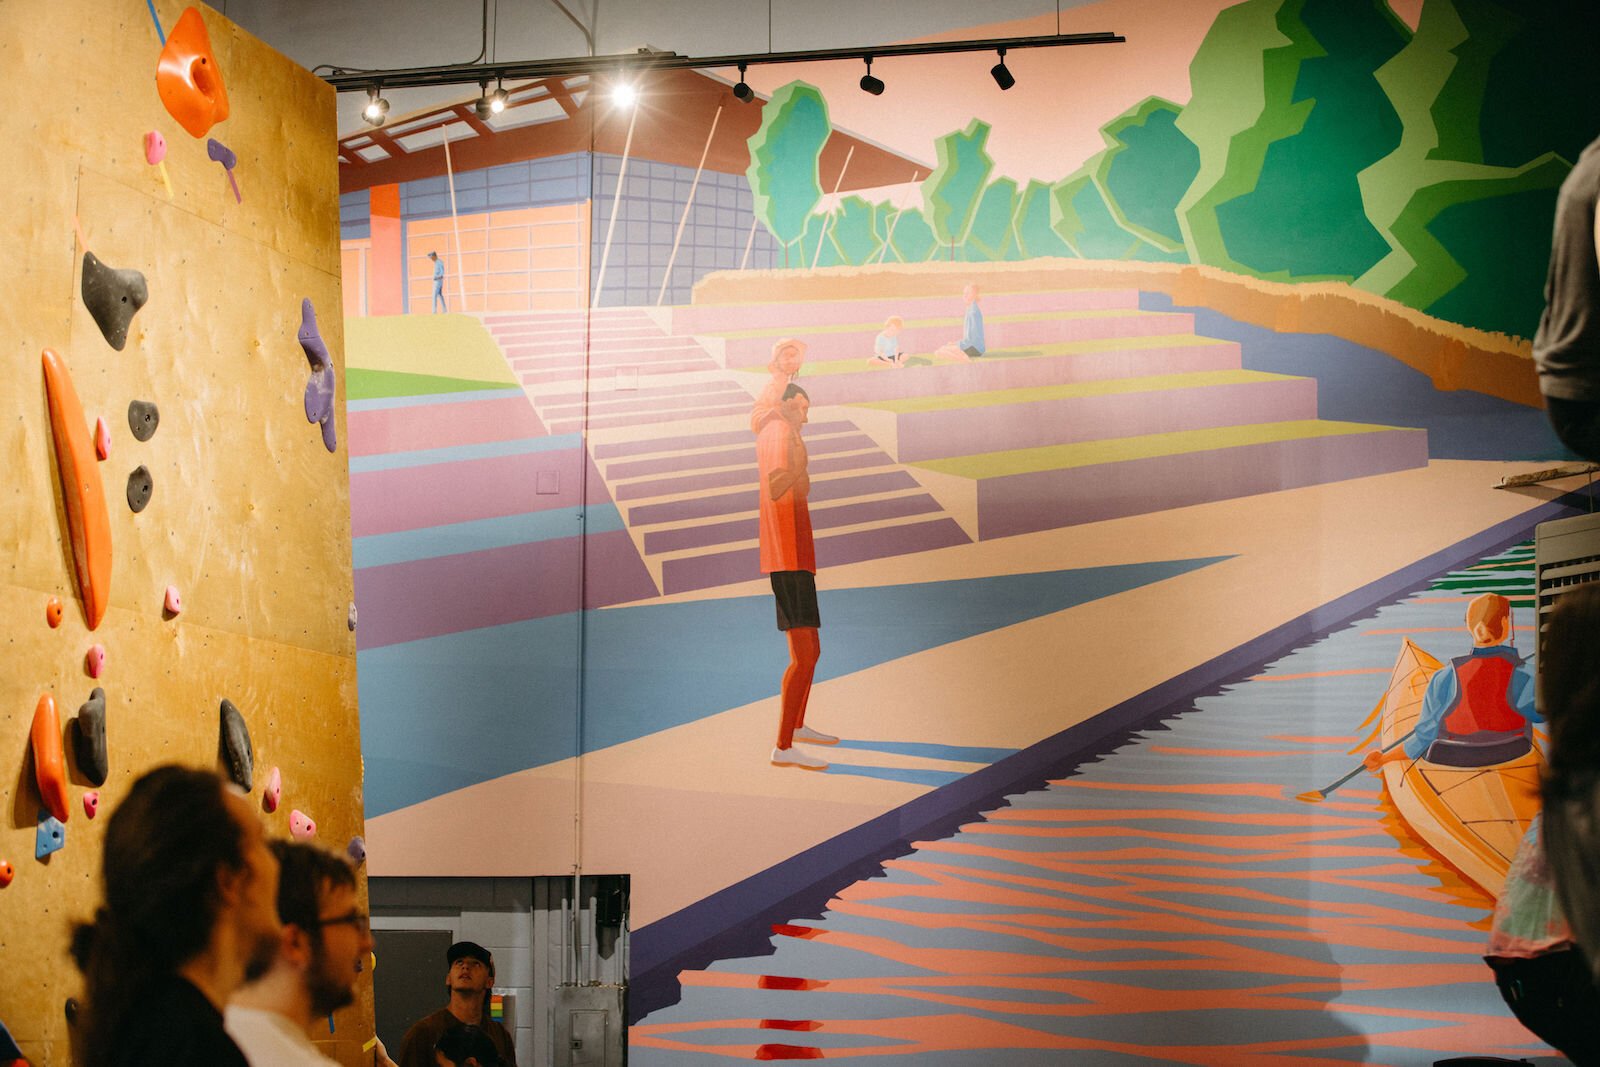 A mural done by Chris Catalogna inside Summit City Climbing Co. depicts Promenade Park.